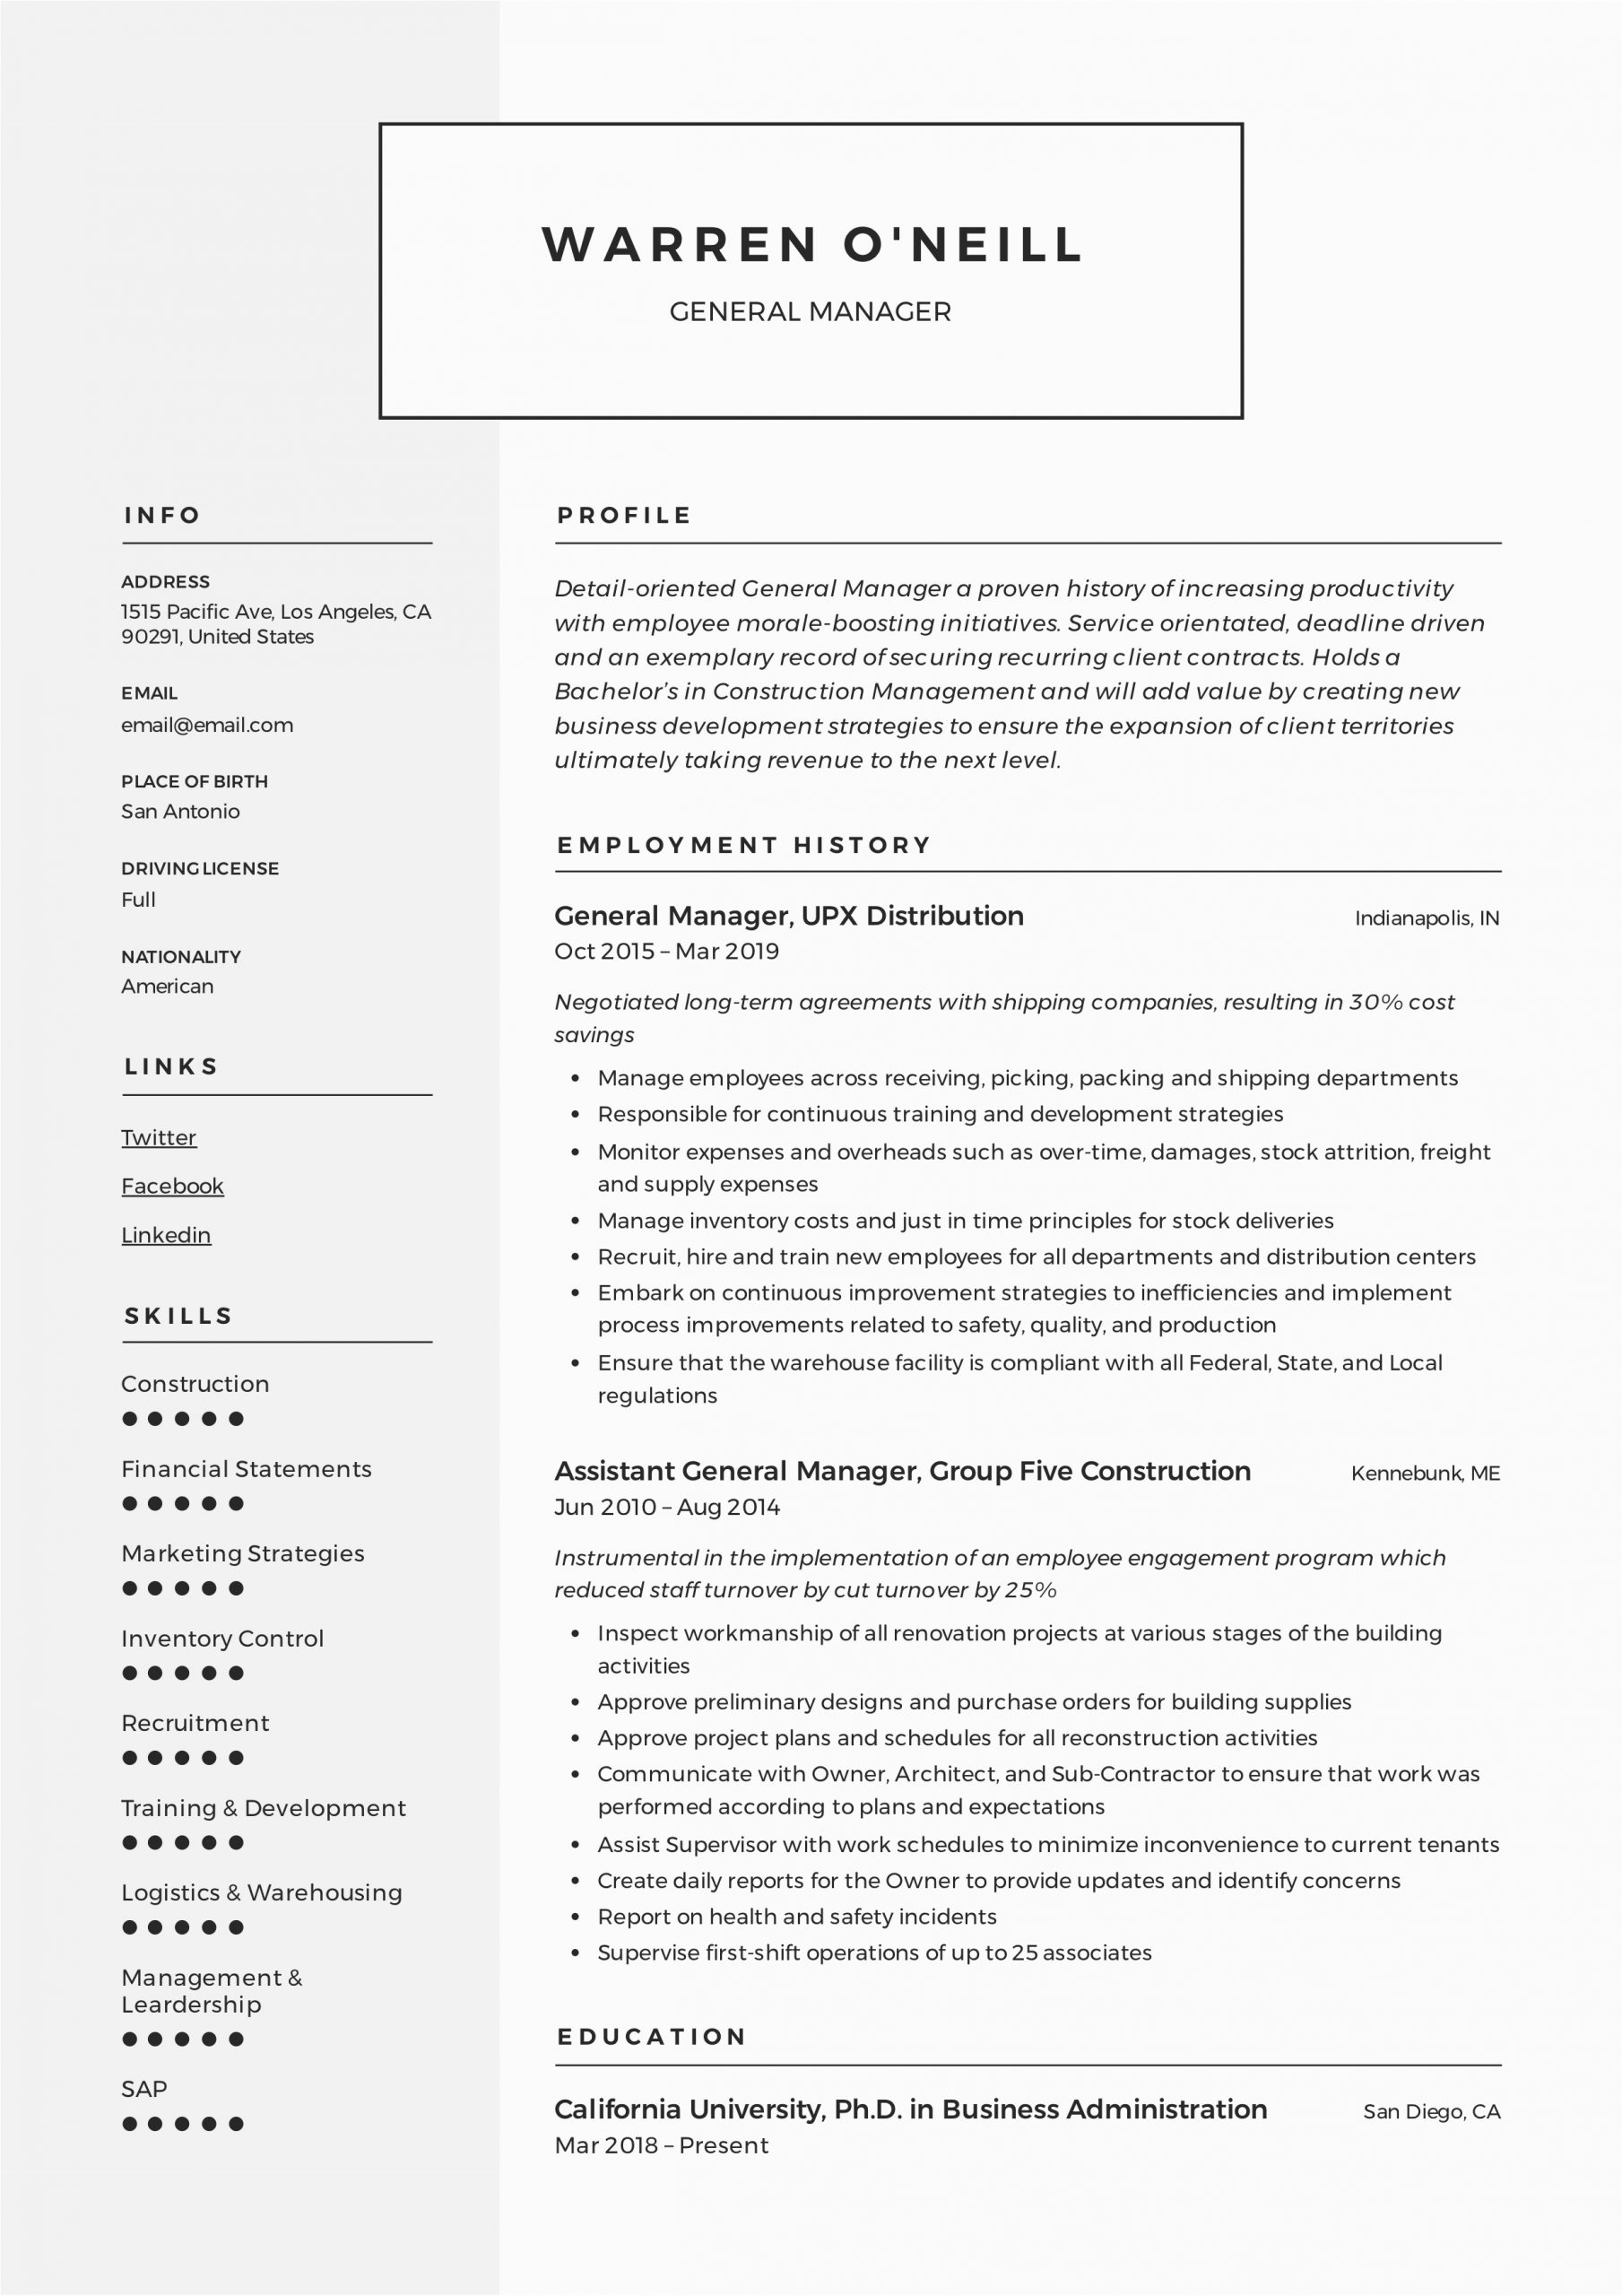 Sample Resume for General Manager Position General Manager Resume & Writing Guide